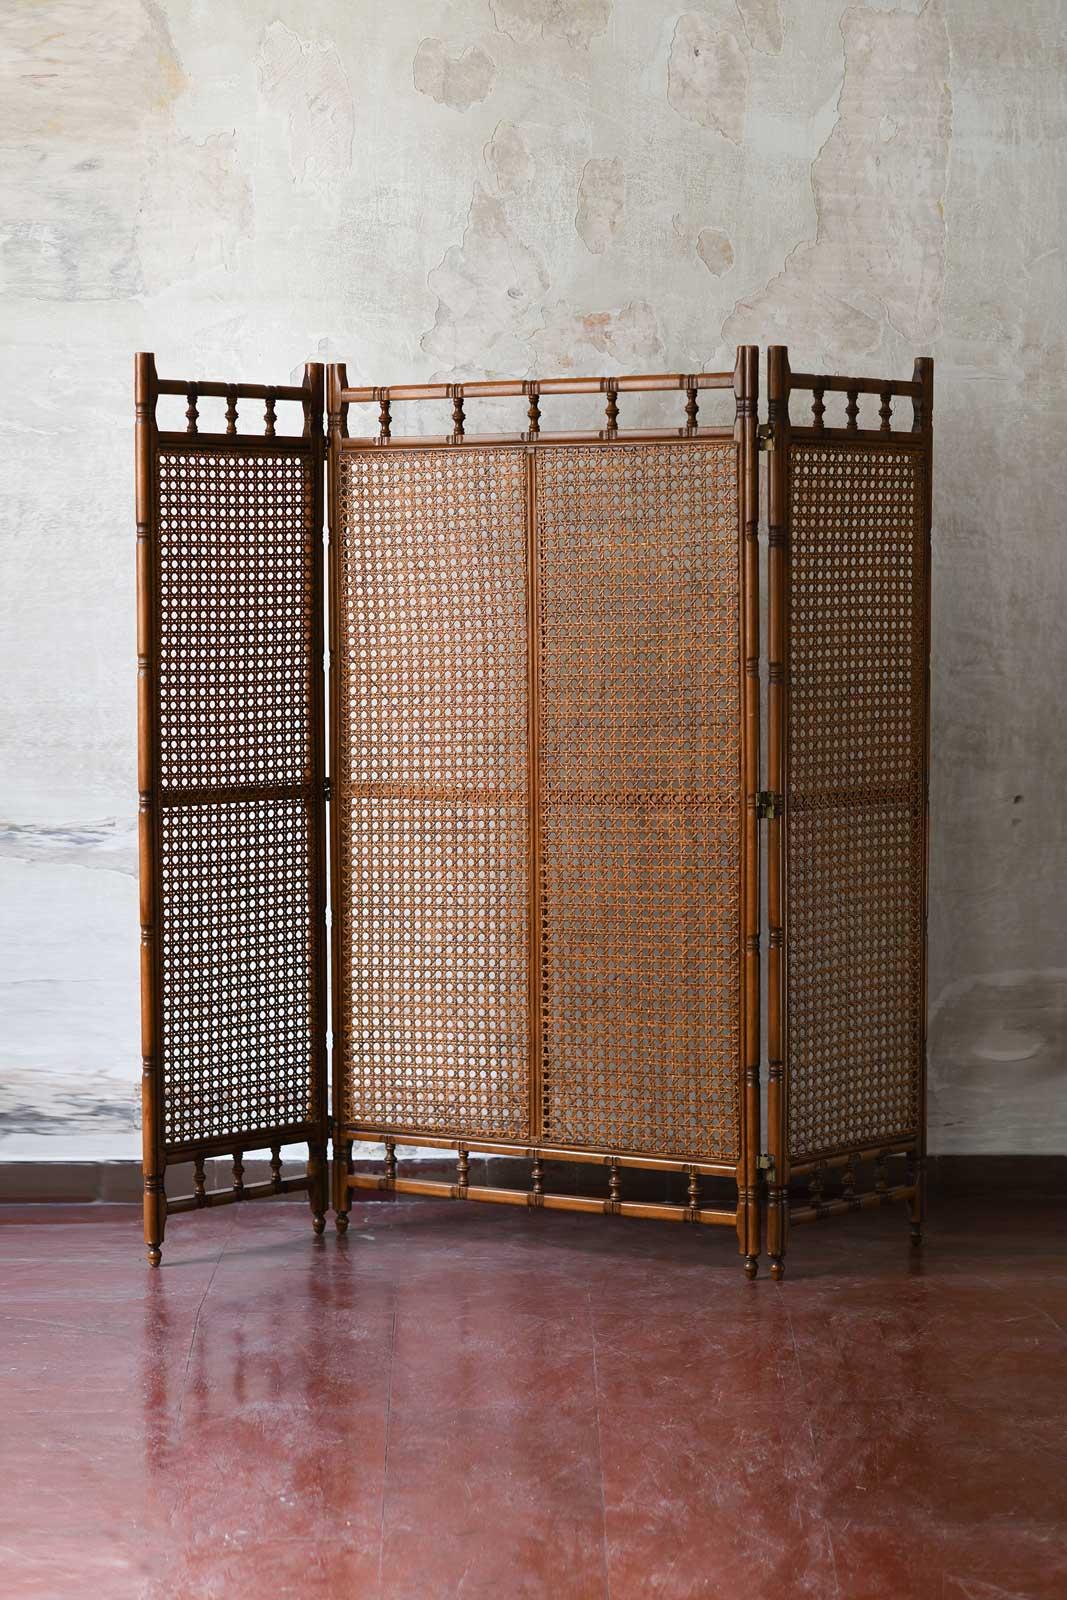 Three-panel screen in carved wood and Vienna straw, 1920s.
Product details
Dimensions: 200 W x 180 H x 3 D cm